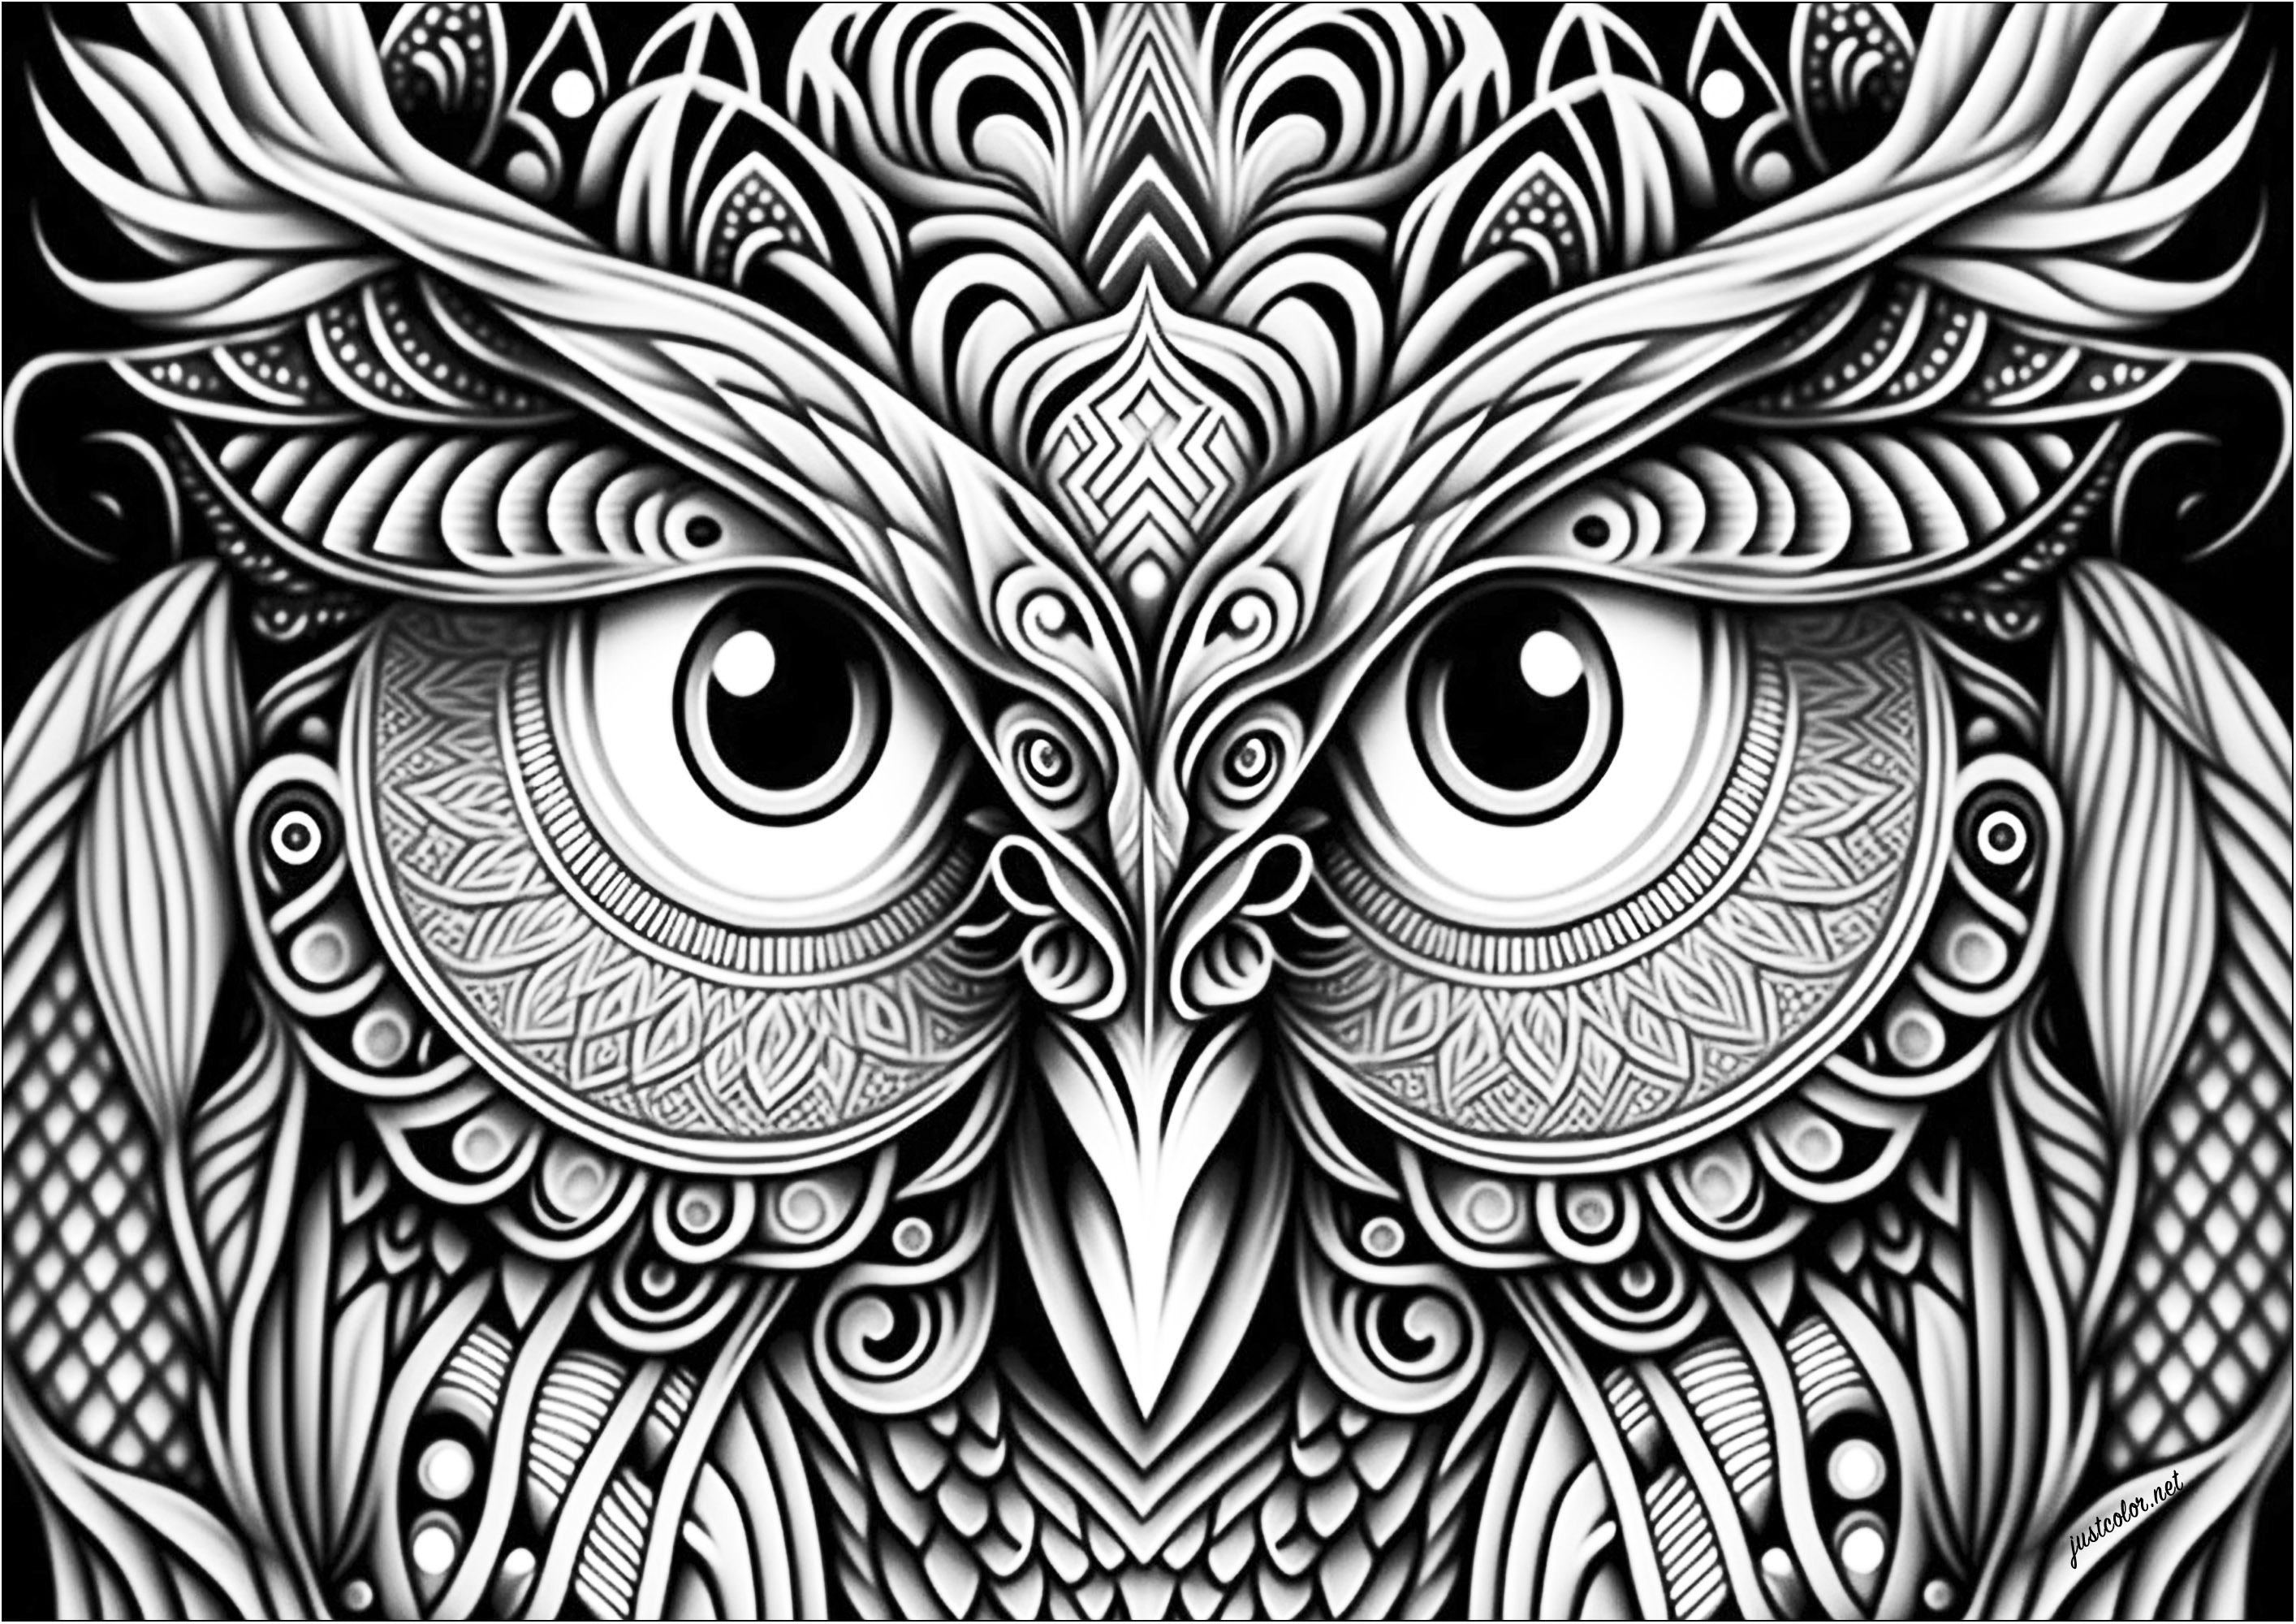 Owl head with many details to color. This coloring page is perfect for lovers of nocturnal animals! The owl head is very realistic and there are plenty of details to color.The owl's beady eyes are very expressive and add a touch of mystery to the illustration.